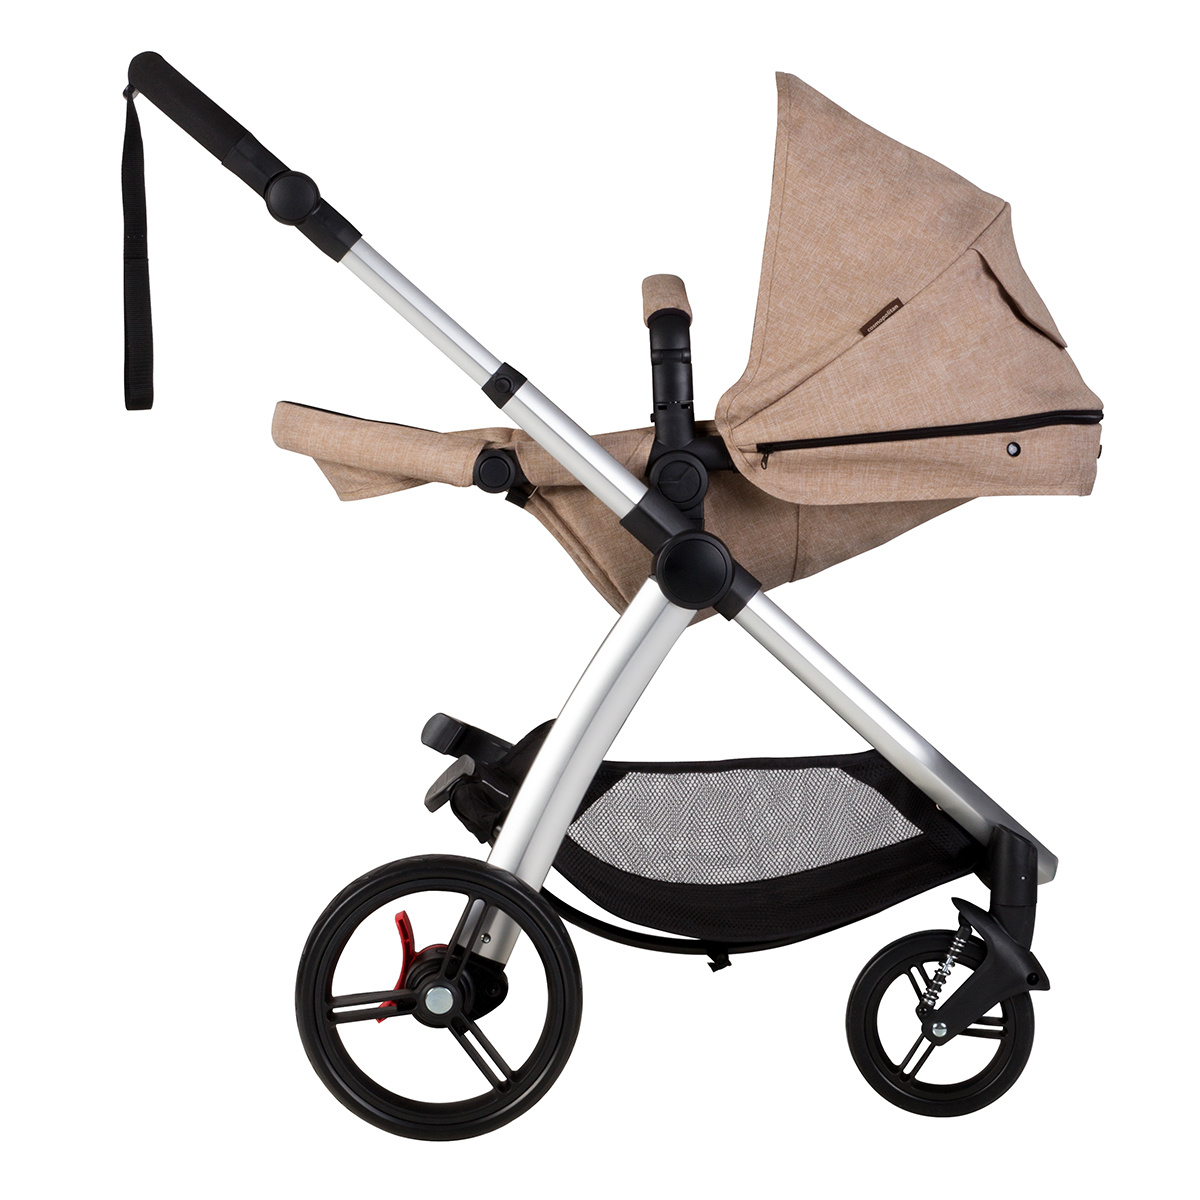 mountain buggy cosmo baby carrycot